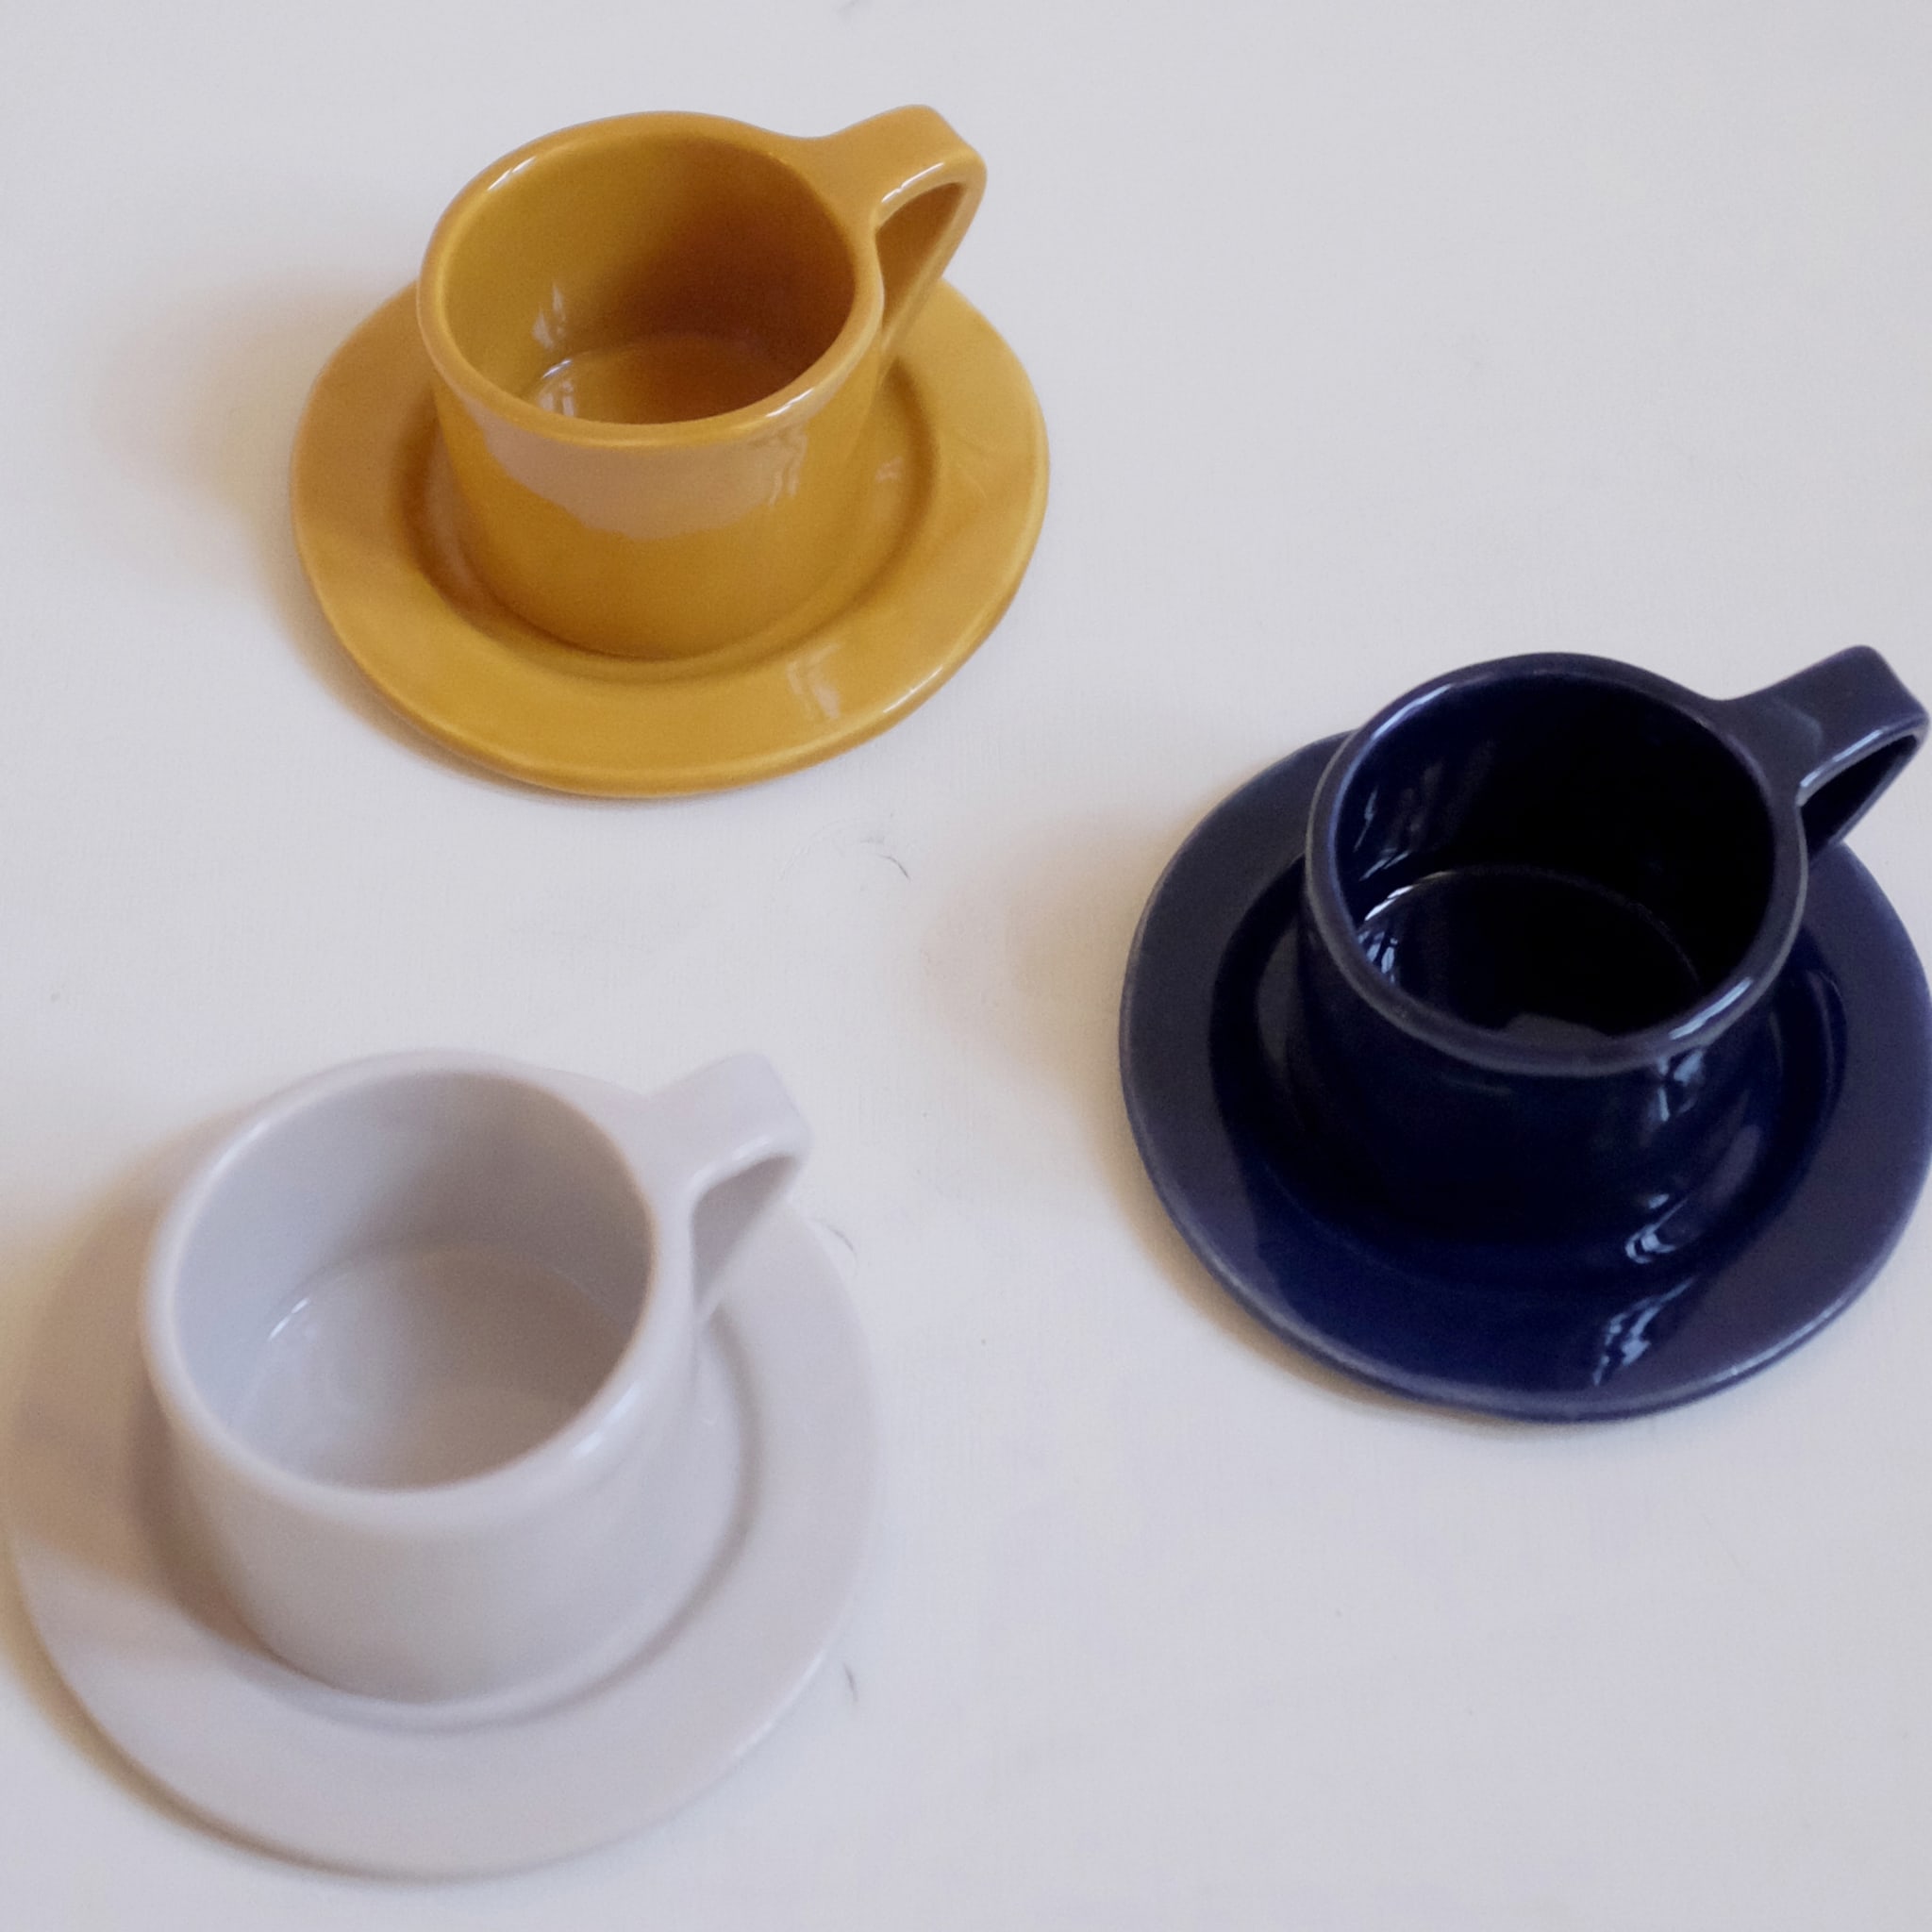 Milano Nebbia Set of 4 Espresso cups and saucers - Alternative view 2